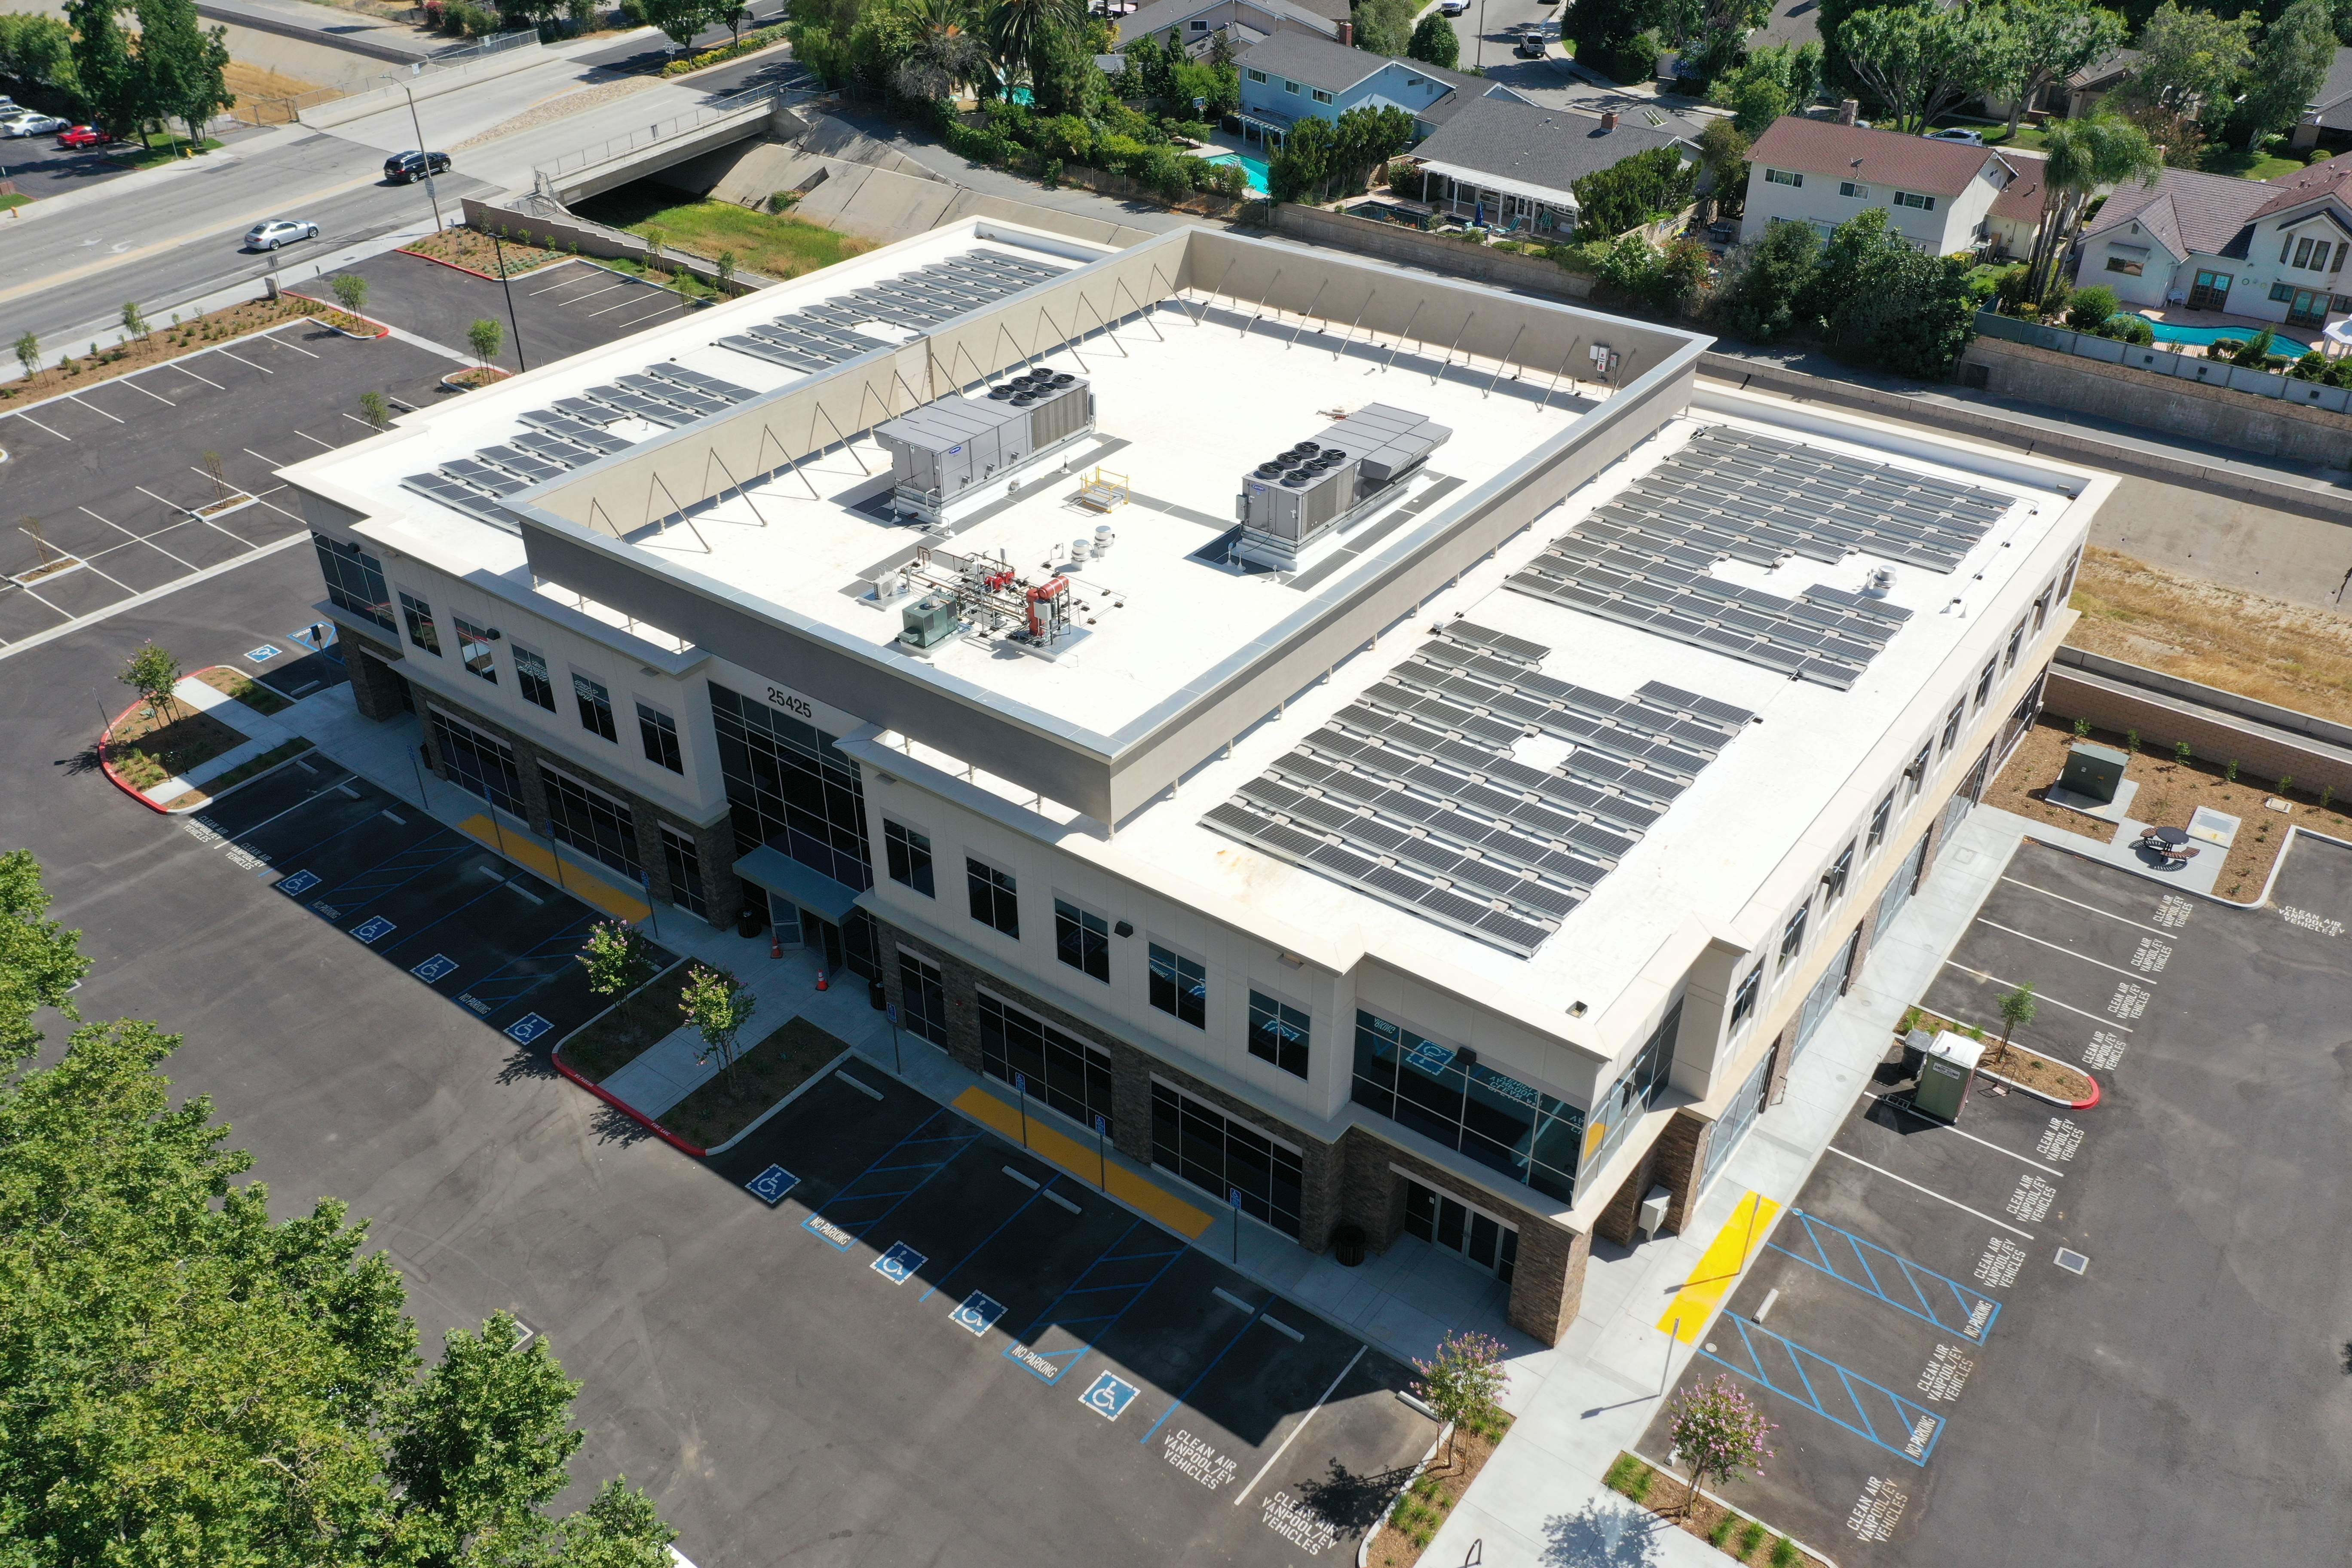 An above view of a rooftop solar system on a commercial building.